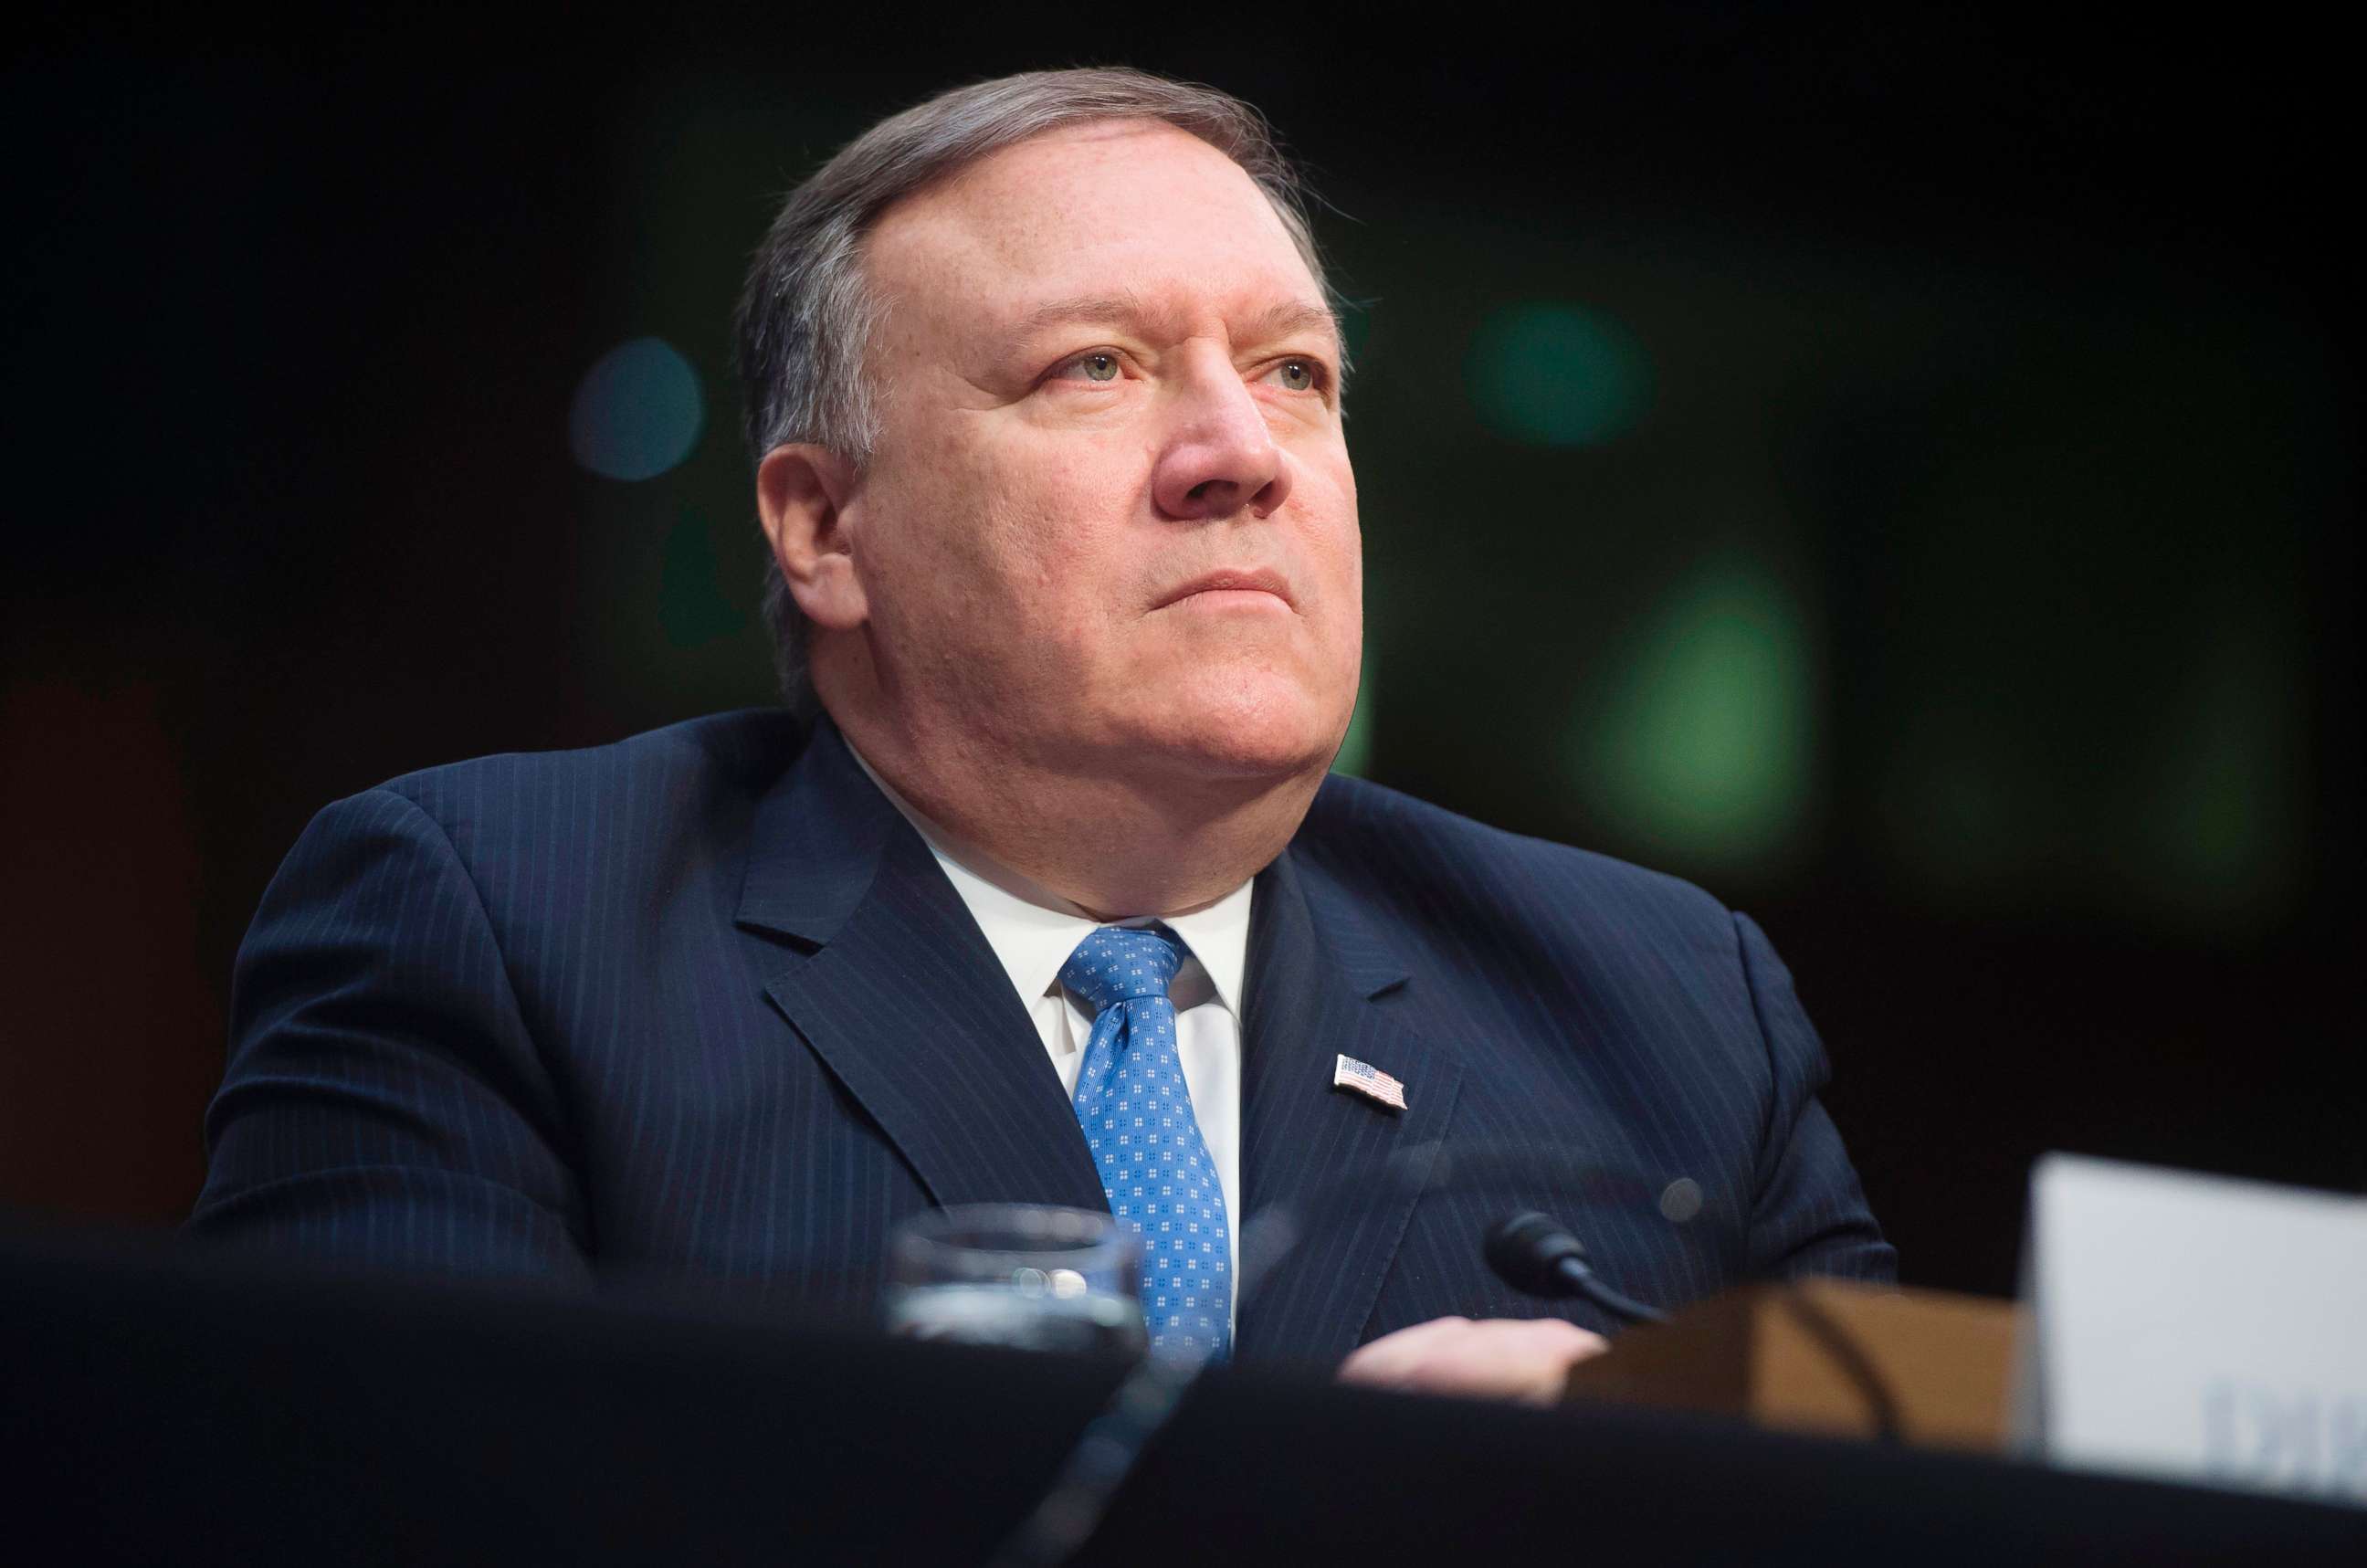 PHOTO: CIA Director Mike Pompeo testifies on worldwide threats during a Senate Intelligence Committee hearing on Capitol Hill in Washington, D.C., in this Feb. 13, 2018 file photo.